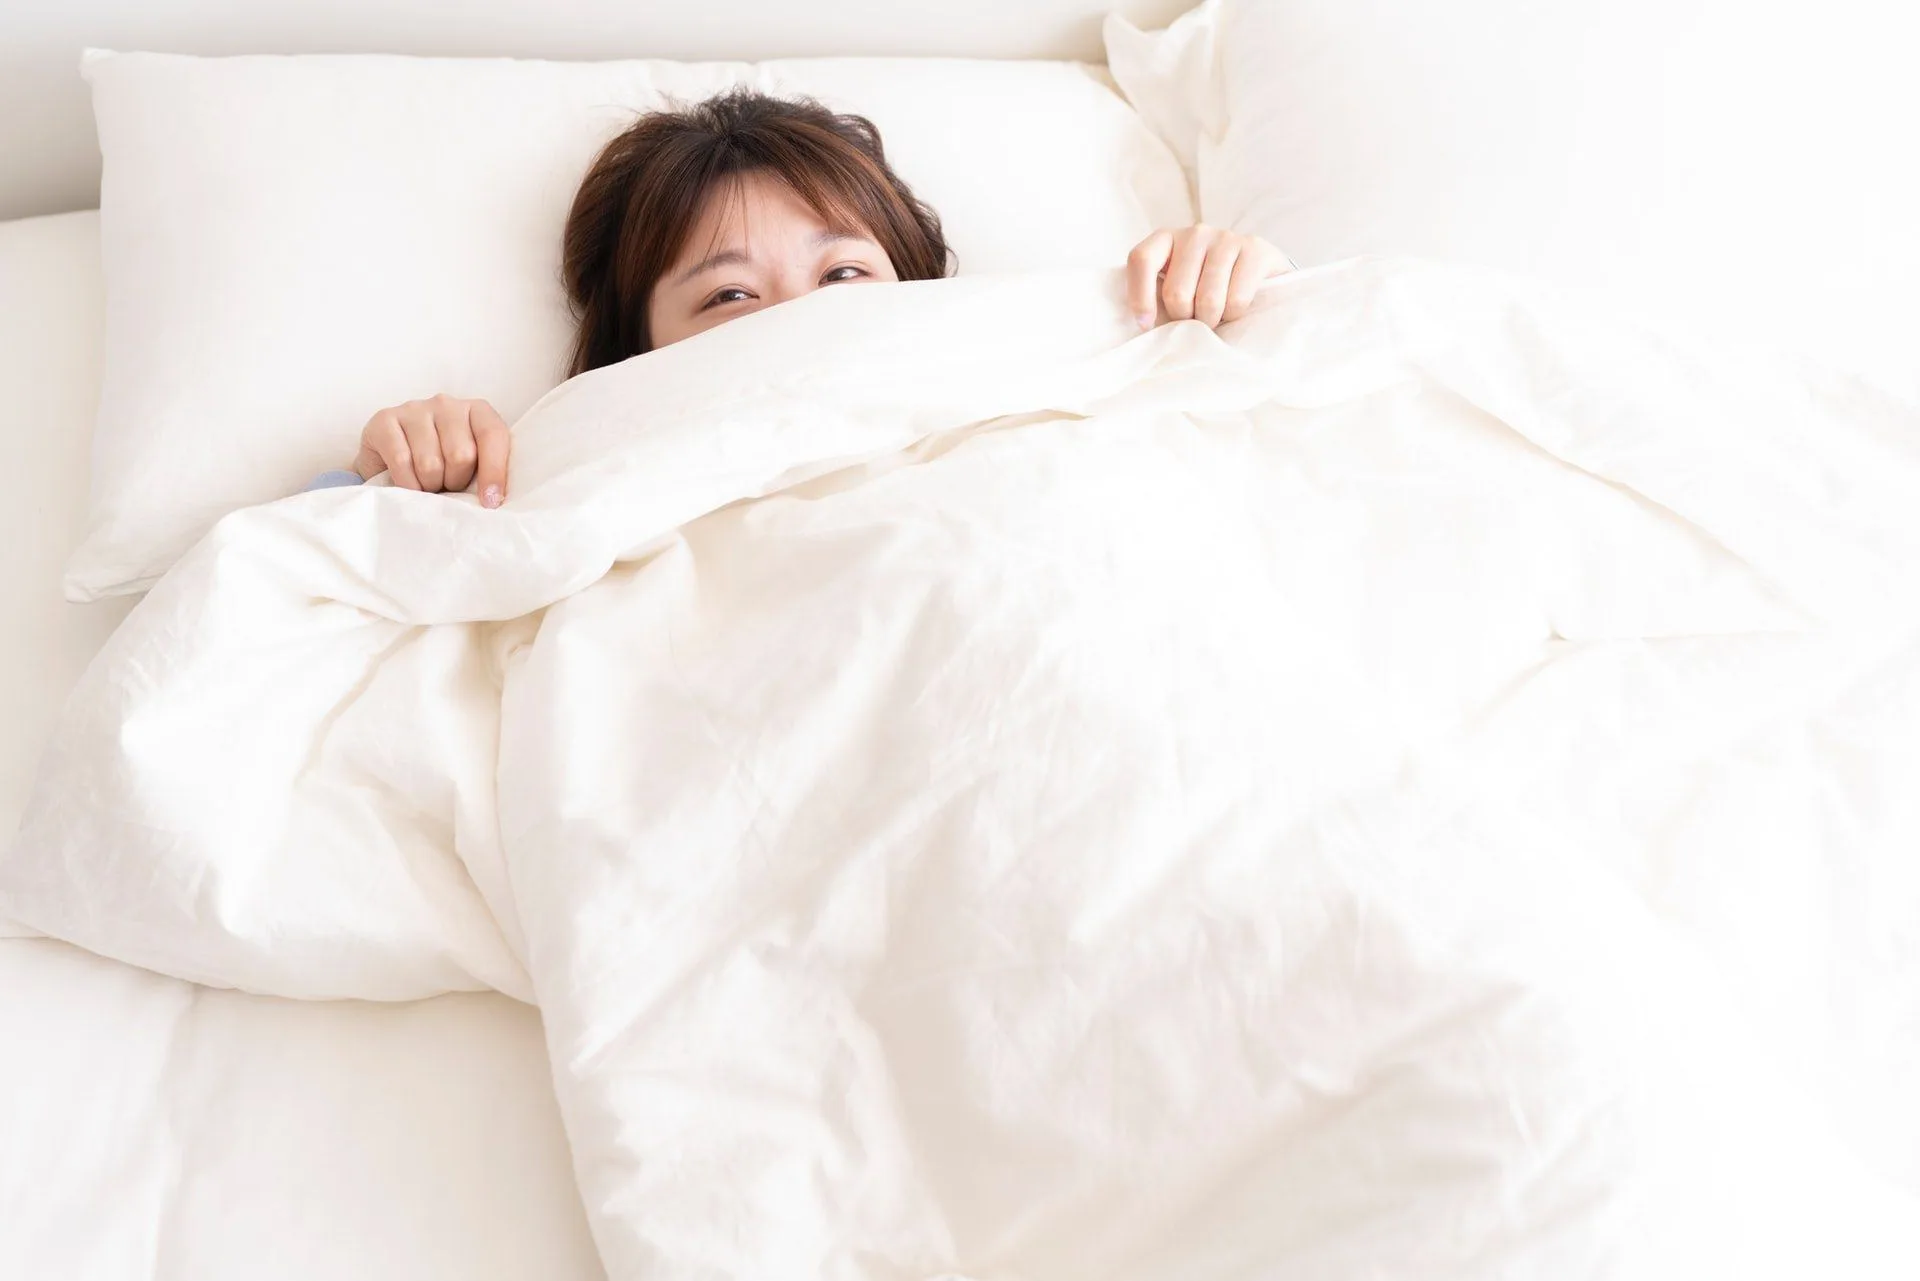 Can’t Sleep? Here are 5 Natural Alternatives to Sleeping Pills